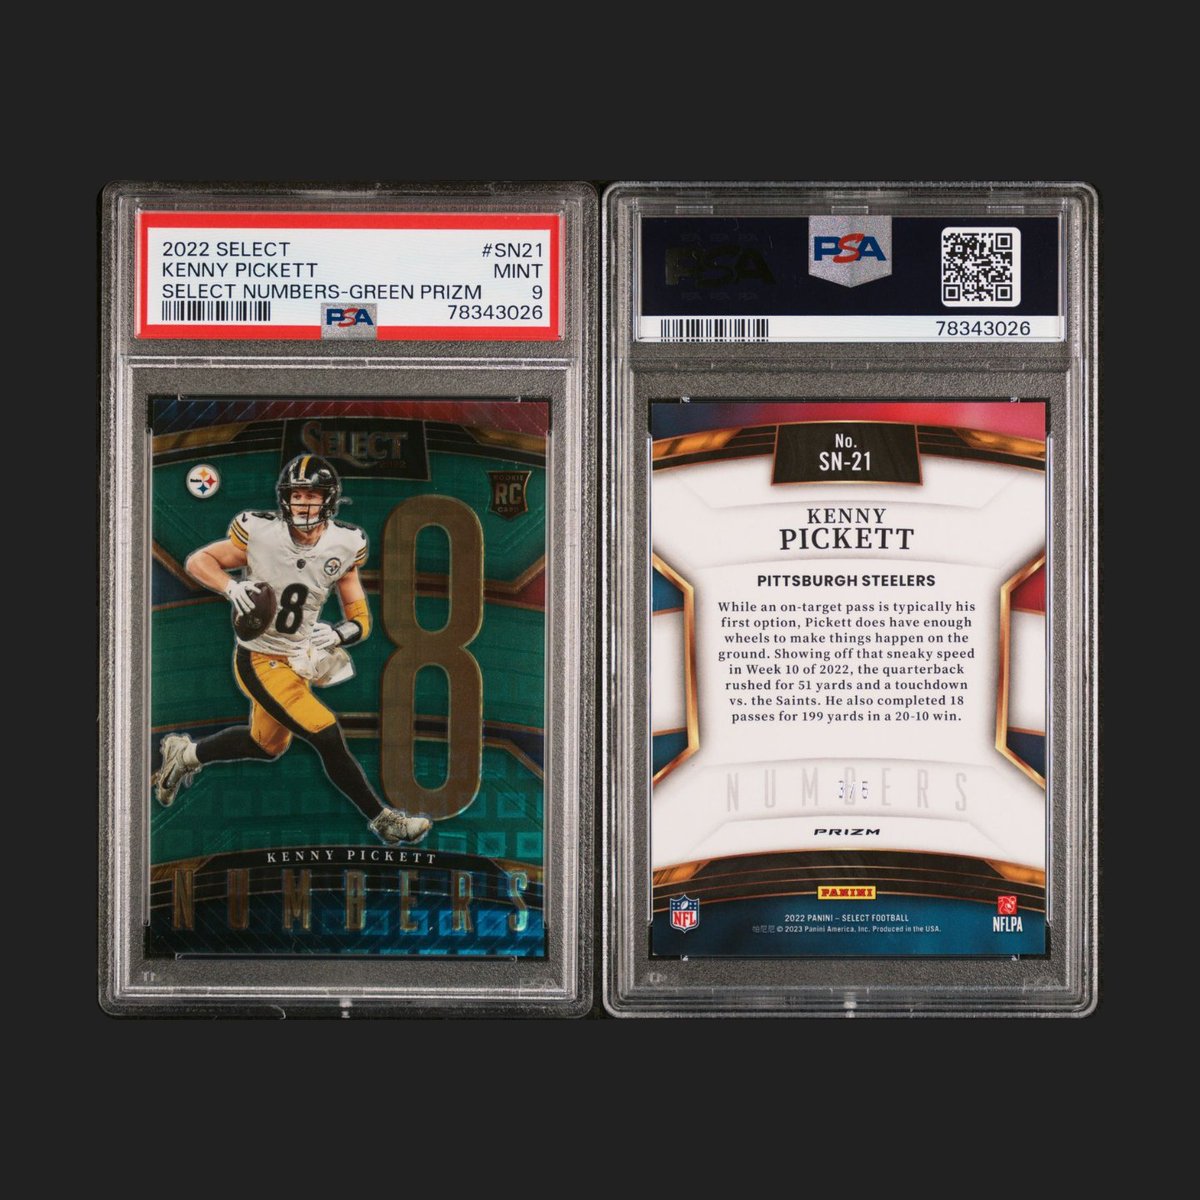 The grade I expected it to be! To the PSA vault and then to @GoldinCo it goes!
#KennyPickett #Panini #PSA #Mint9 #GradeReveal